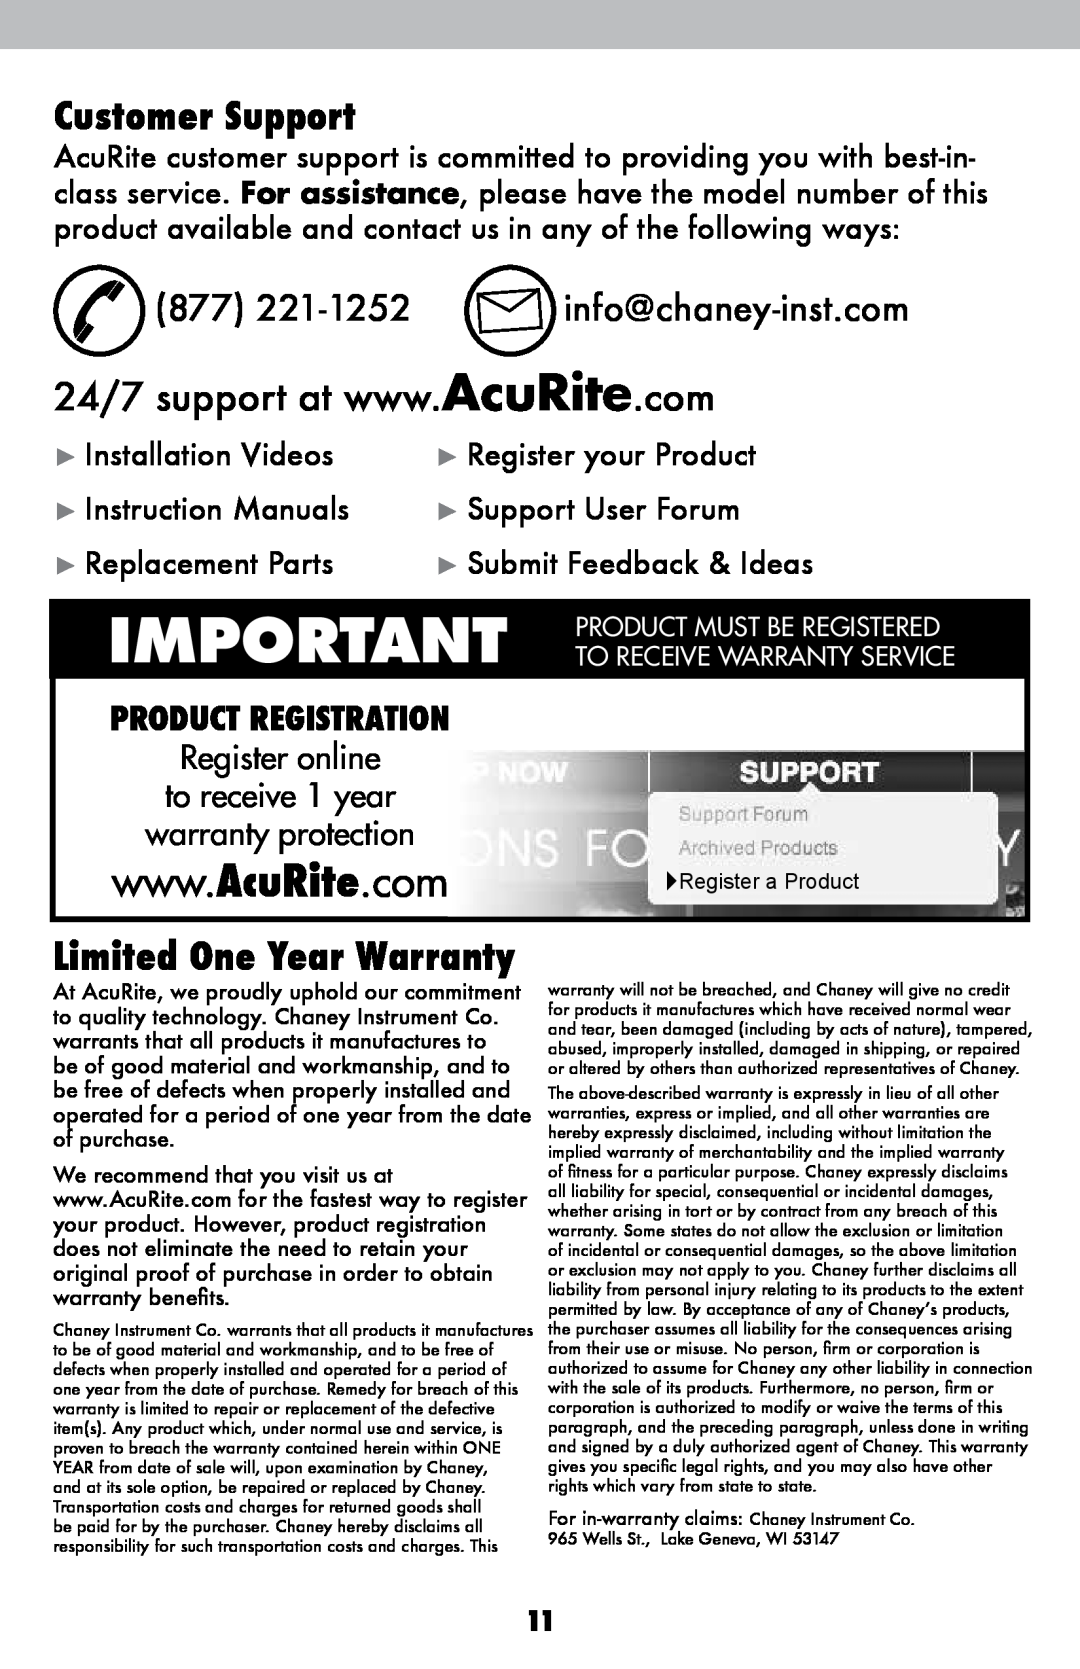 Acu-Rite 00837W Customer Support, Limited One Year Warranty, warranty protection, Installation Videos, Support User Forum 